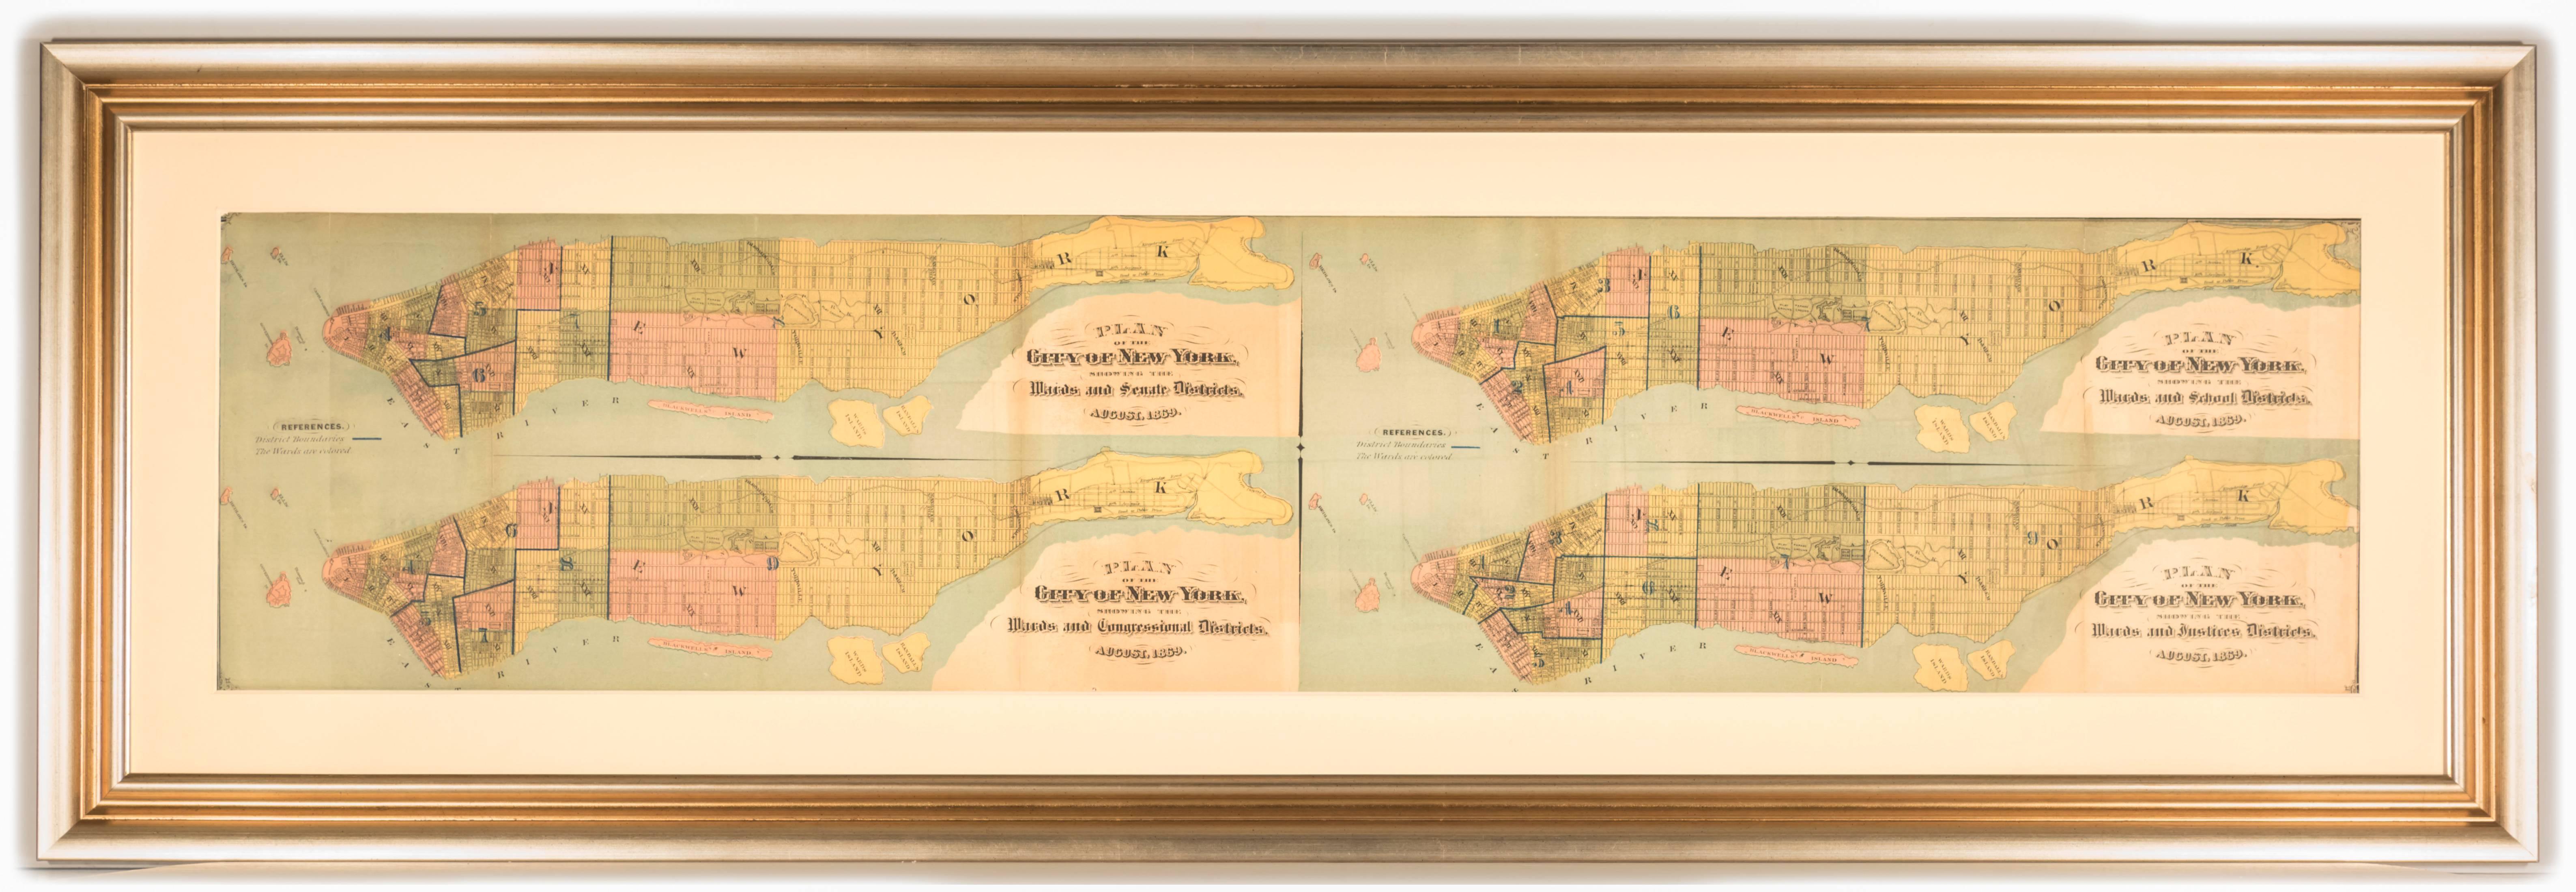 Unknown Print - Historic Plan of New York City Showing Political, Legal, School Districts 